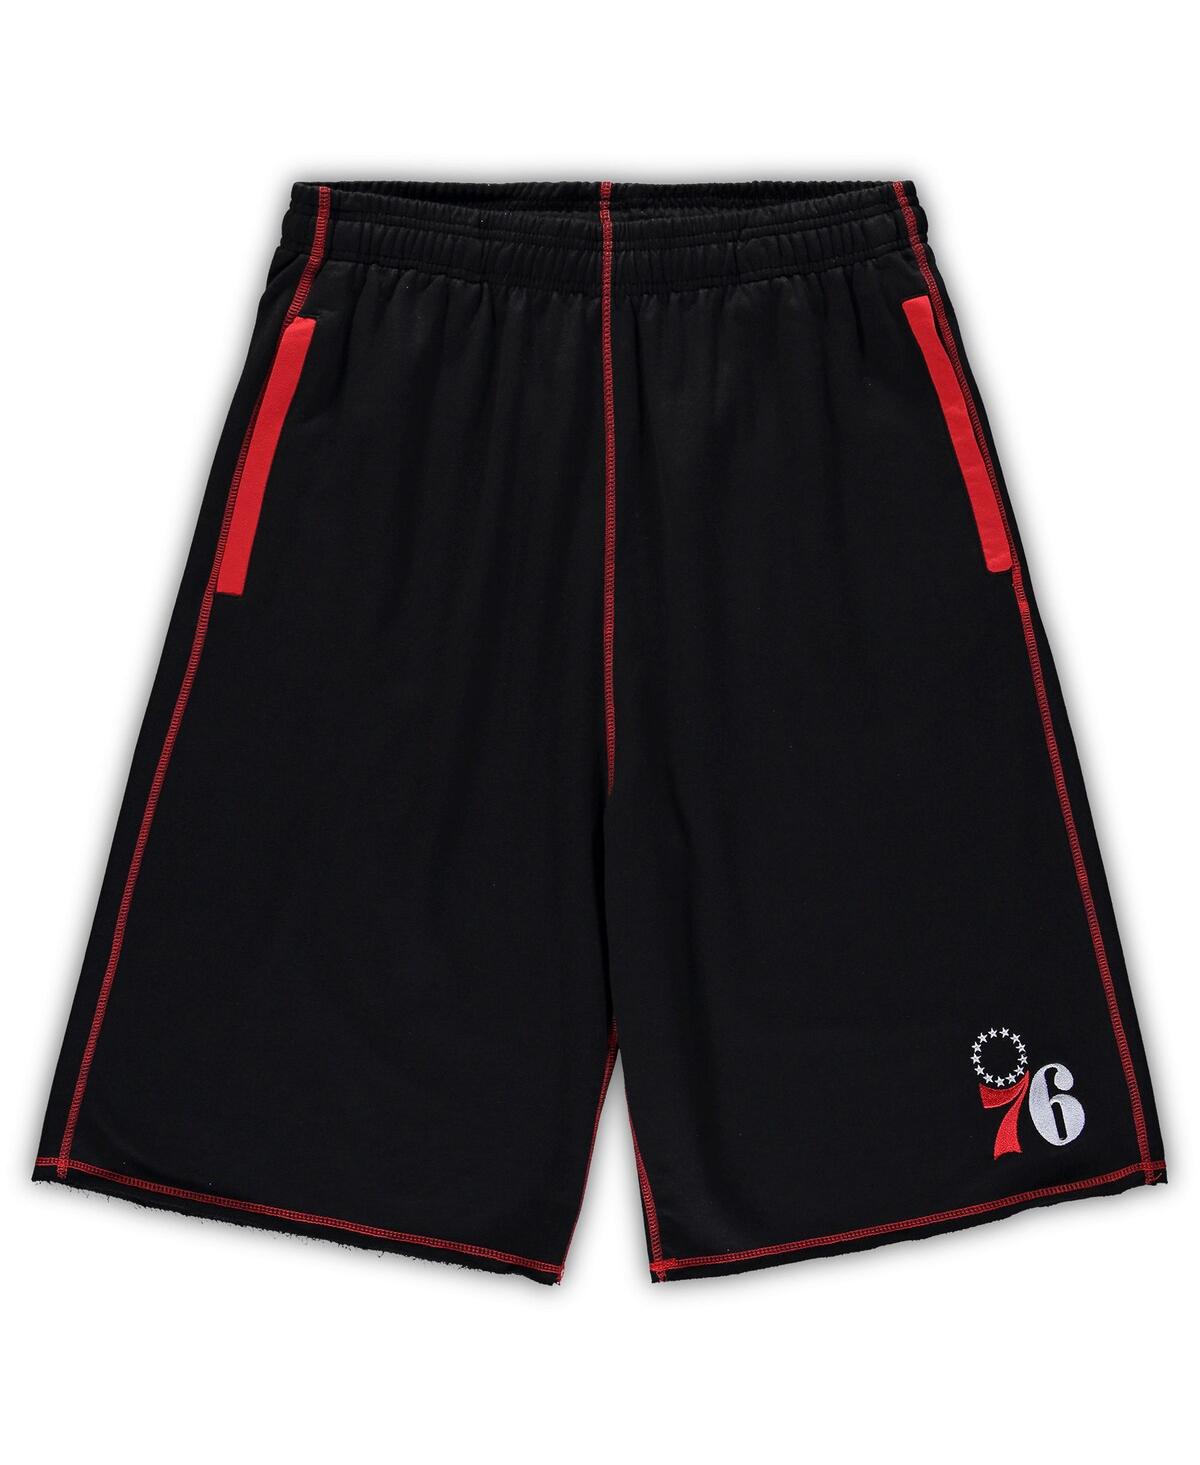 Men's Black, Red Philadelphia 76ers Big and Tall Contrast Stitch Knit Shorts - Black, Red